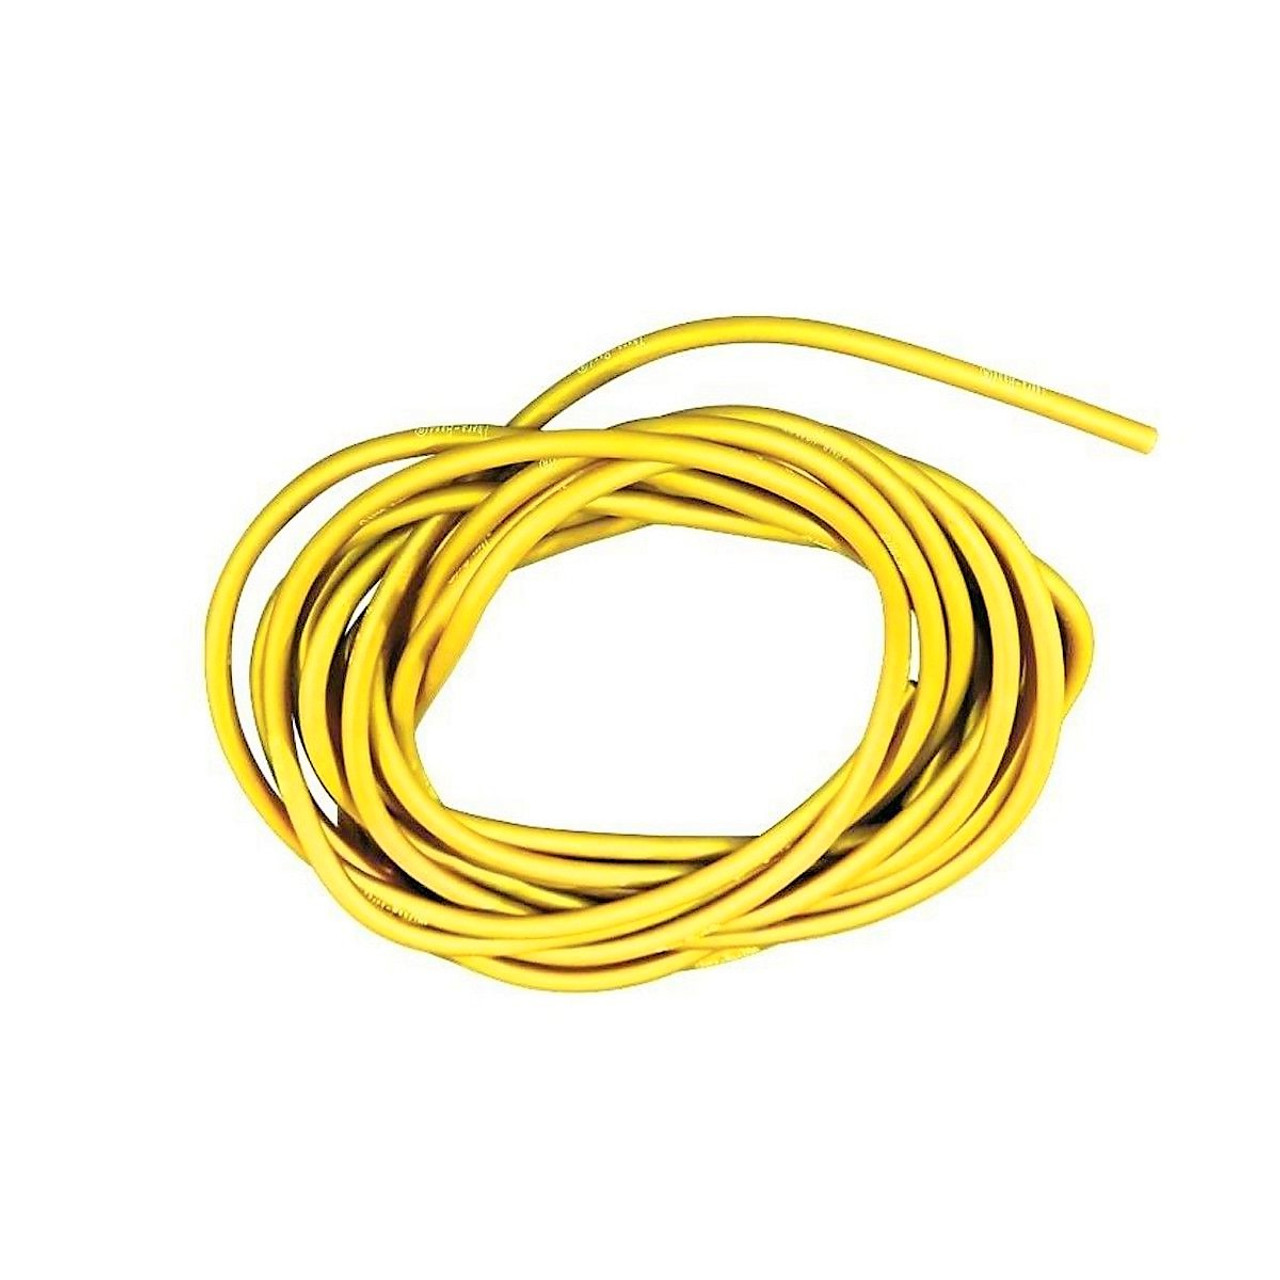 Thera-Band 21020 EXERCISE RESISTANCE TUBING 25FT, THIN, YELLOW